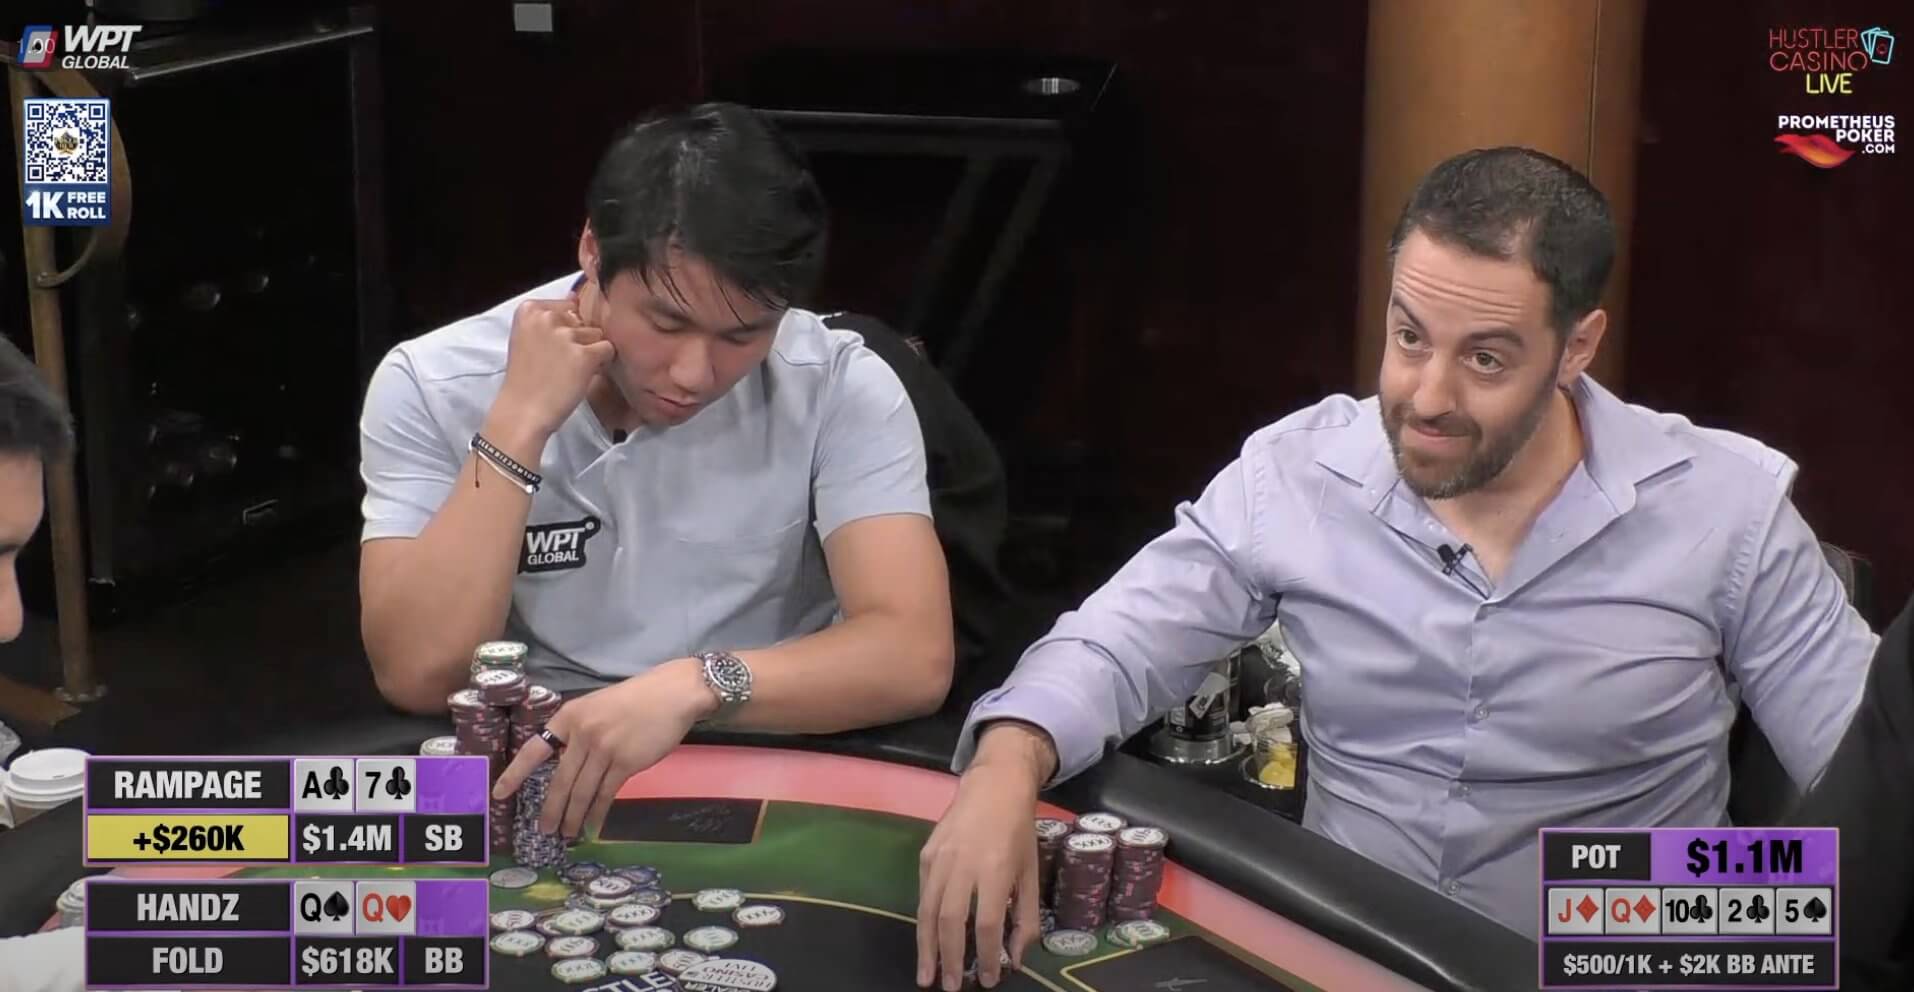 Poker Hand of the Week – Rampage Runs An Epic Bluff With Ace-High In A $1.1M Pot At The Million Dollar Game